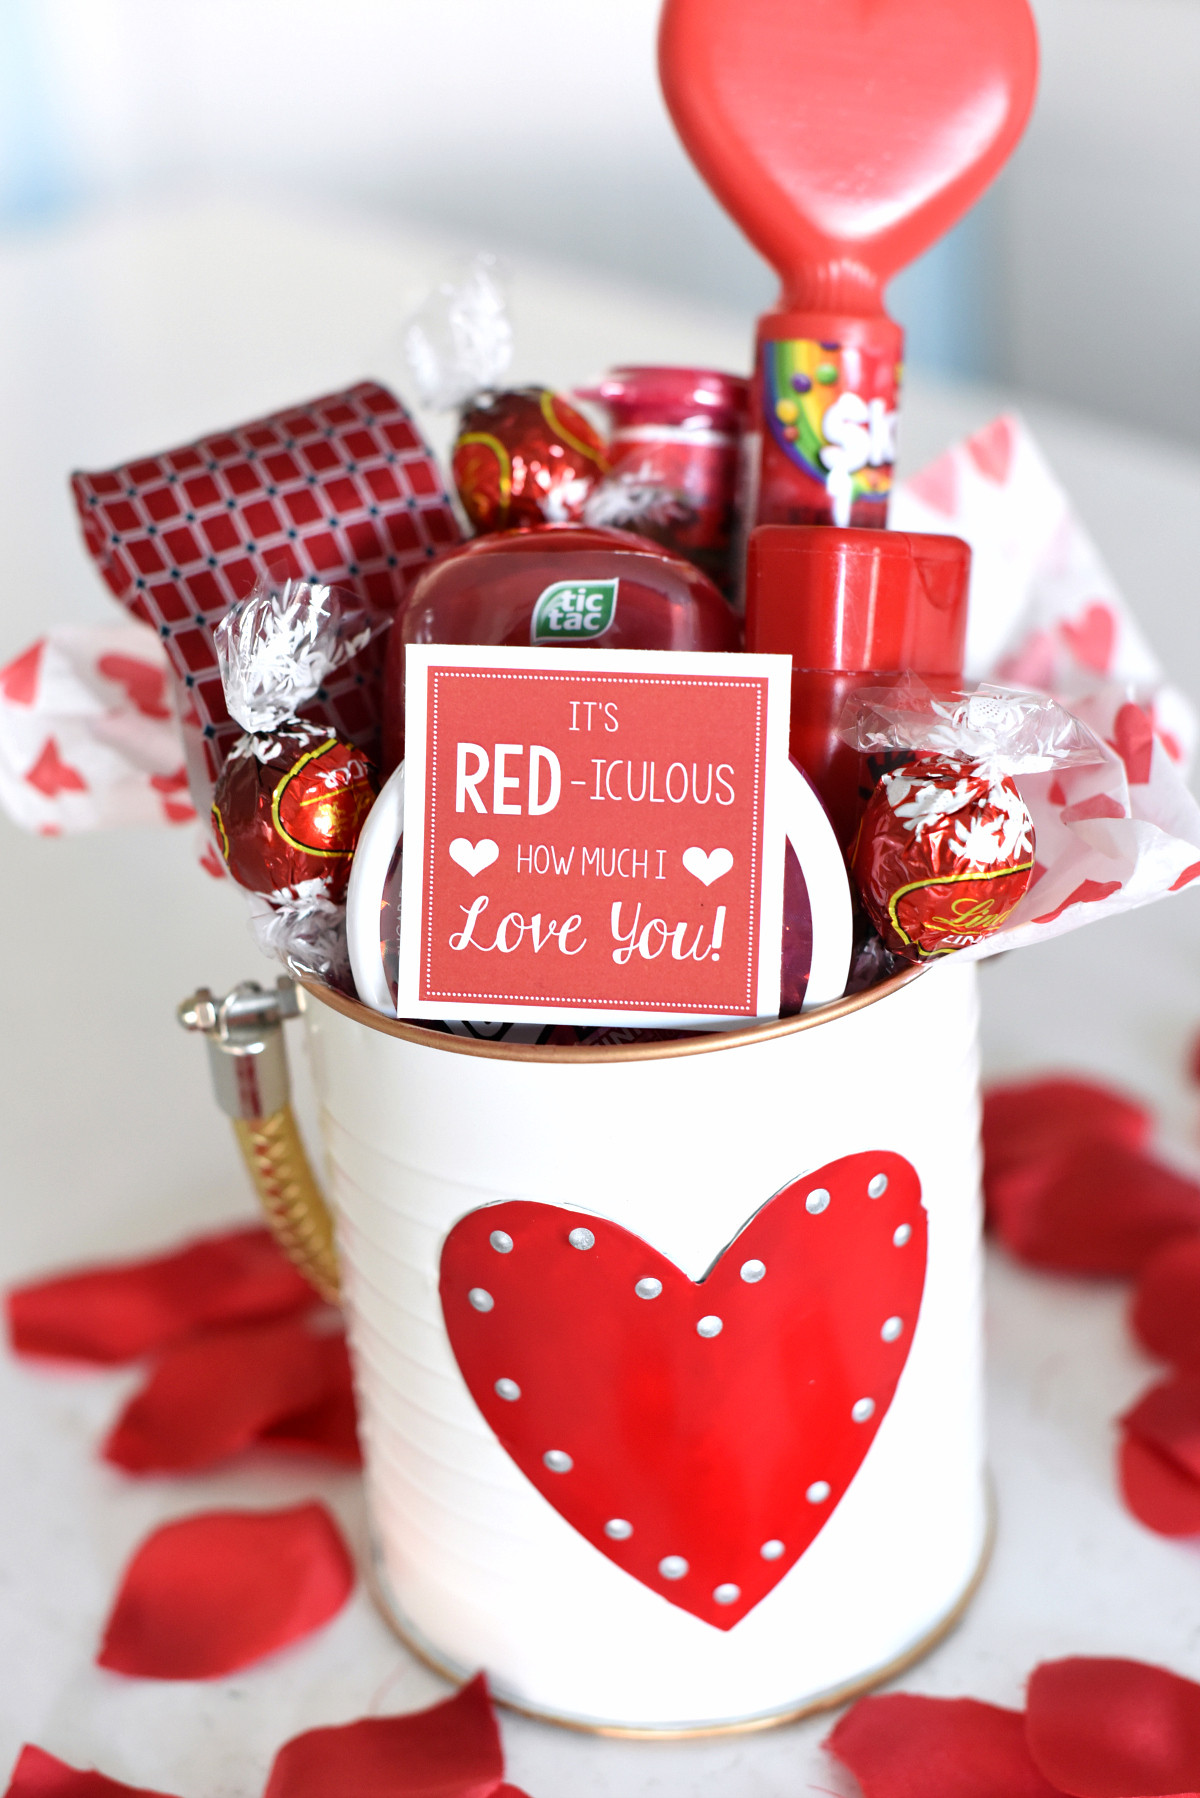 Valentines Day Gifts
 Cute Valentine s Day Gift Idea RED iculous Basket